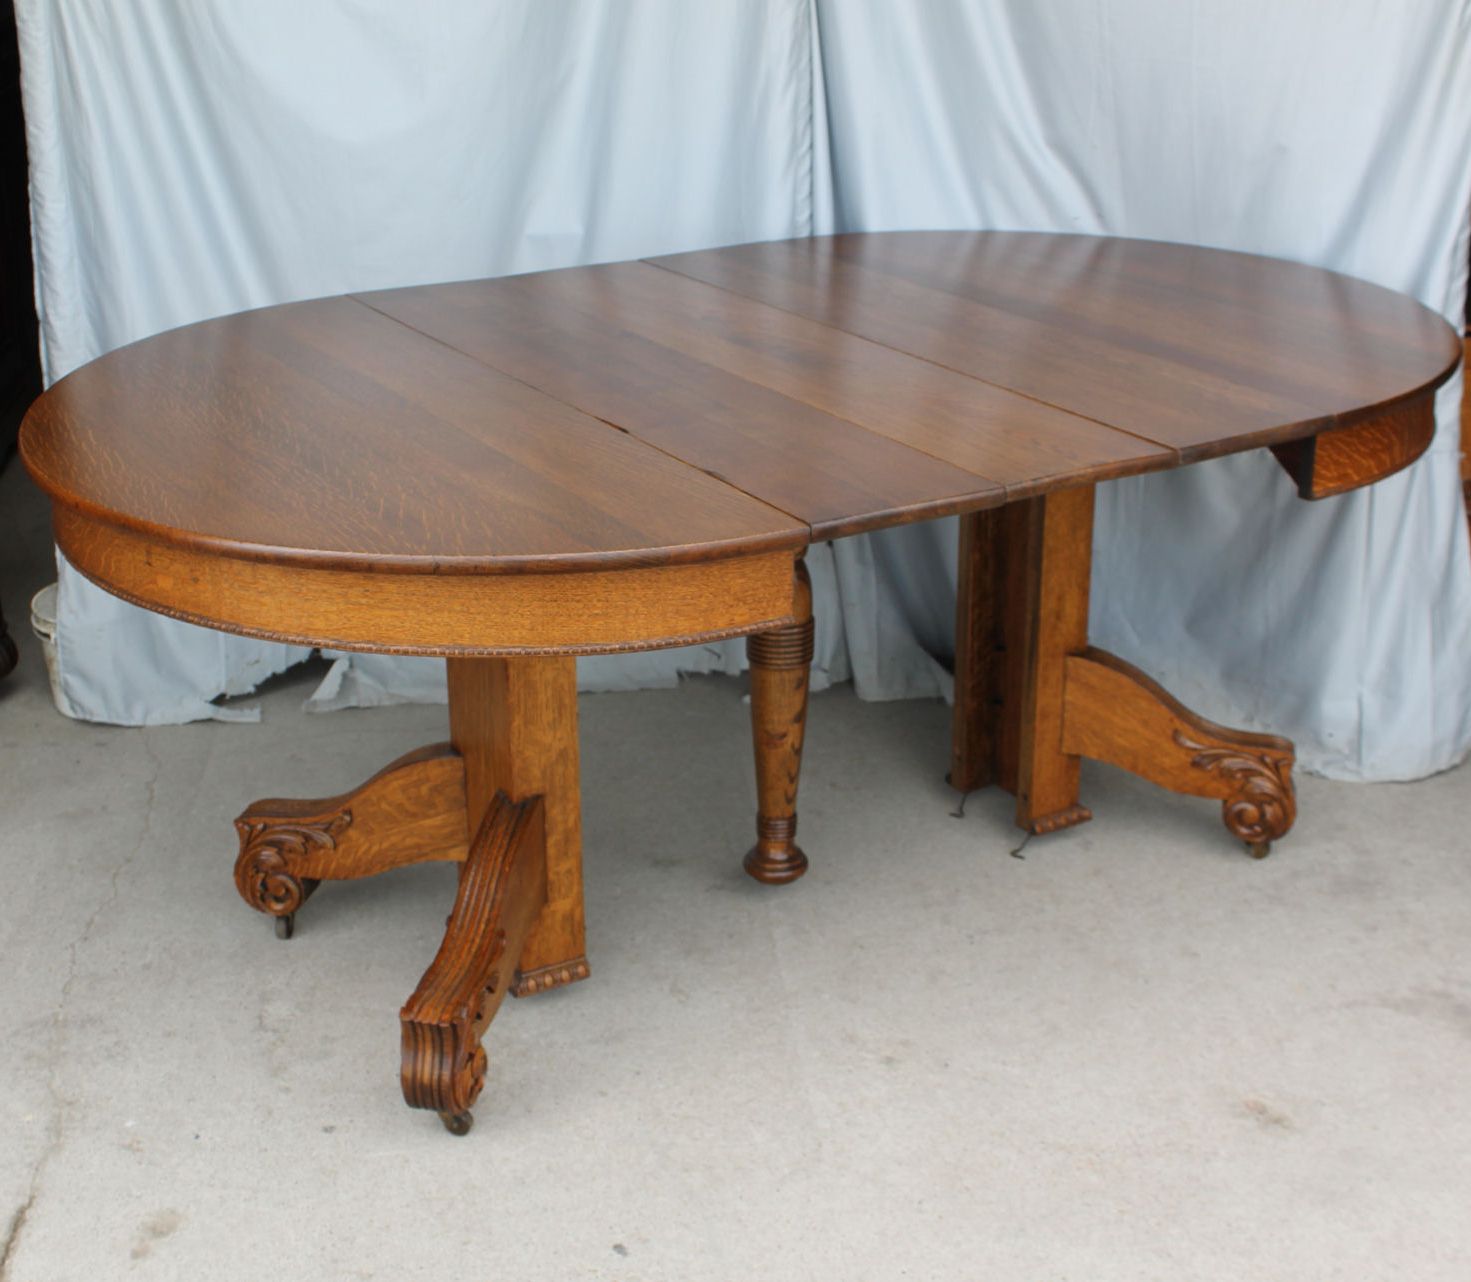 Bargain John's Antiques » Blog Archive Antique Round Oak With Regard To Widely Used Vintage Brown Round Dining Tables (View 12 of 15)